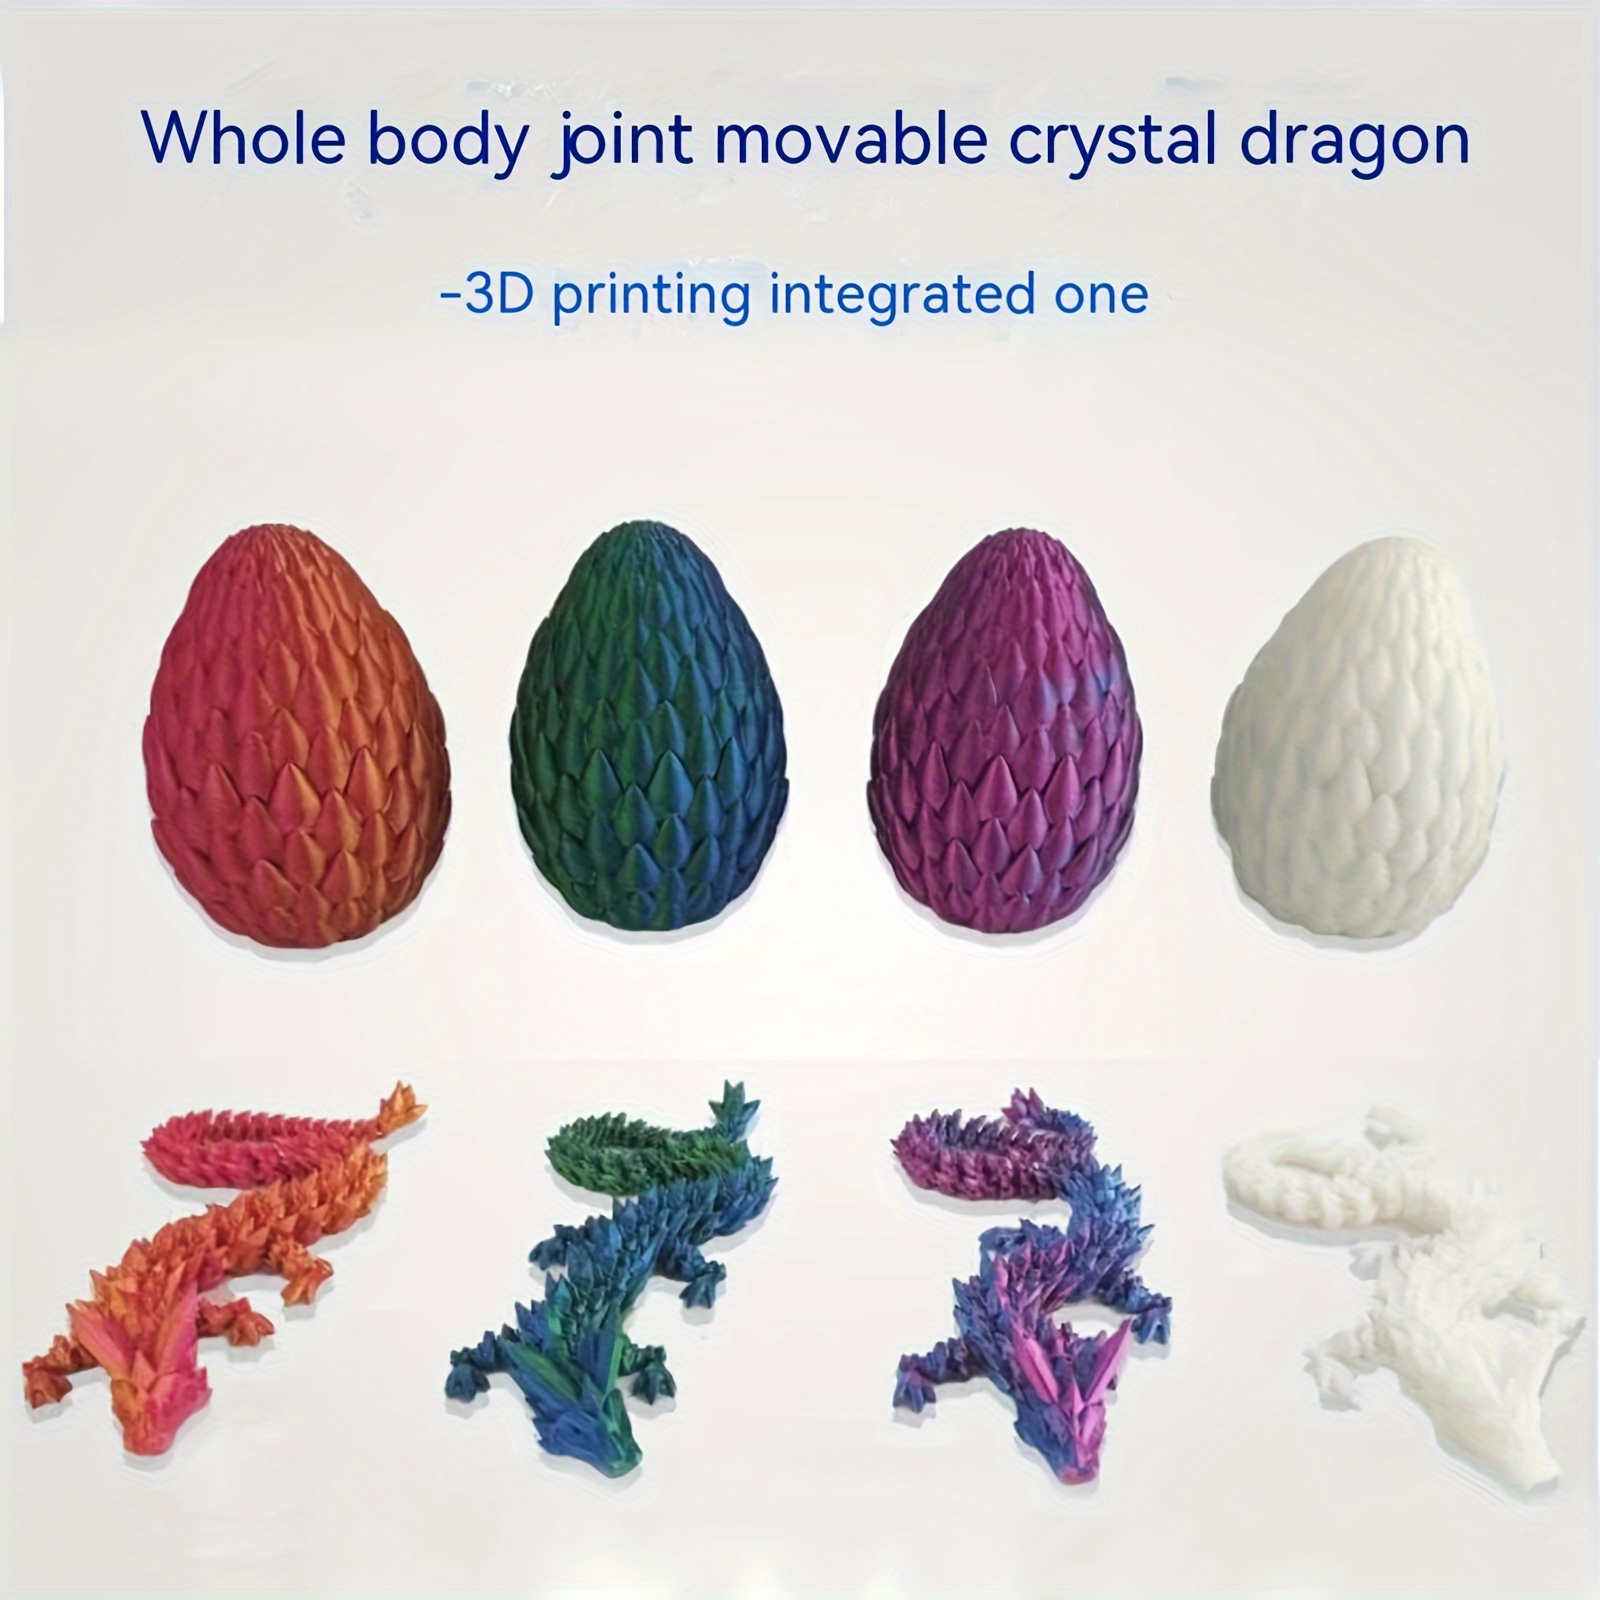 Surprise Dragon Egg Articulating Gemstone Dragon Fidget Toy - 3D Printed  Flexi Dragons Flexible ADHD, Autism, Relief Anxiety - Articulated Joints  for